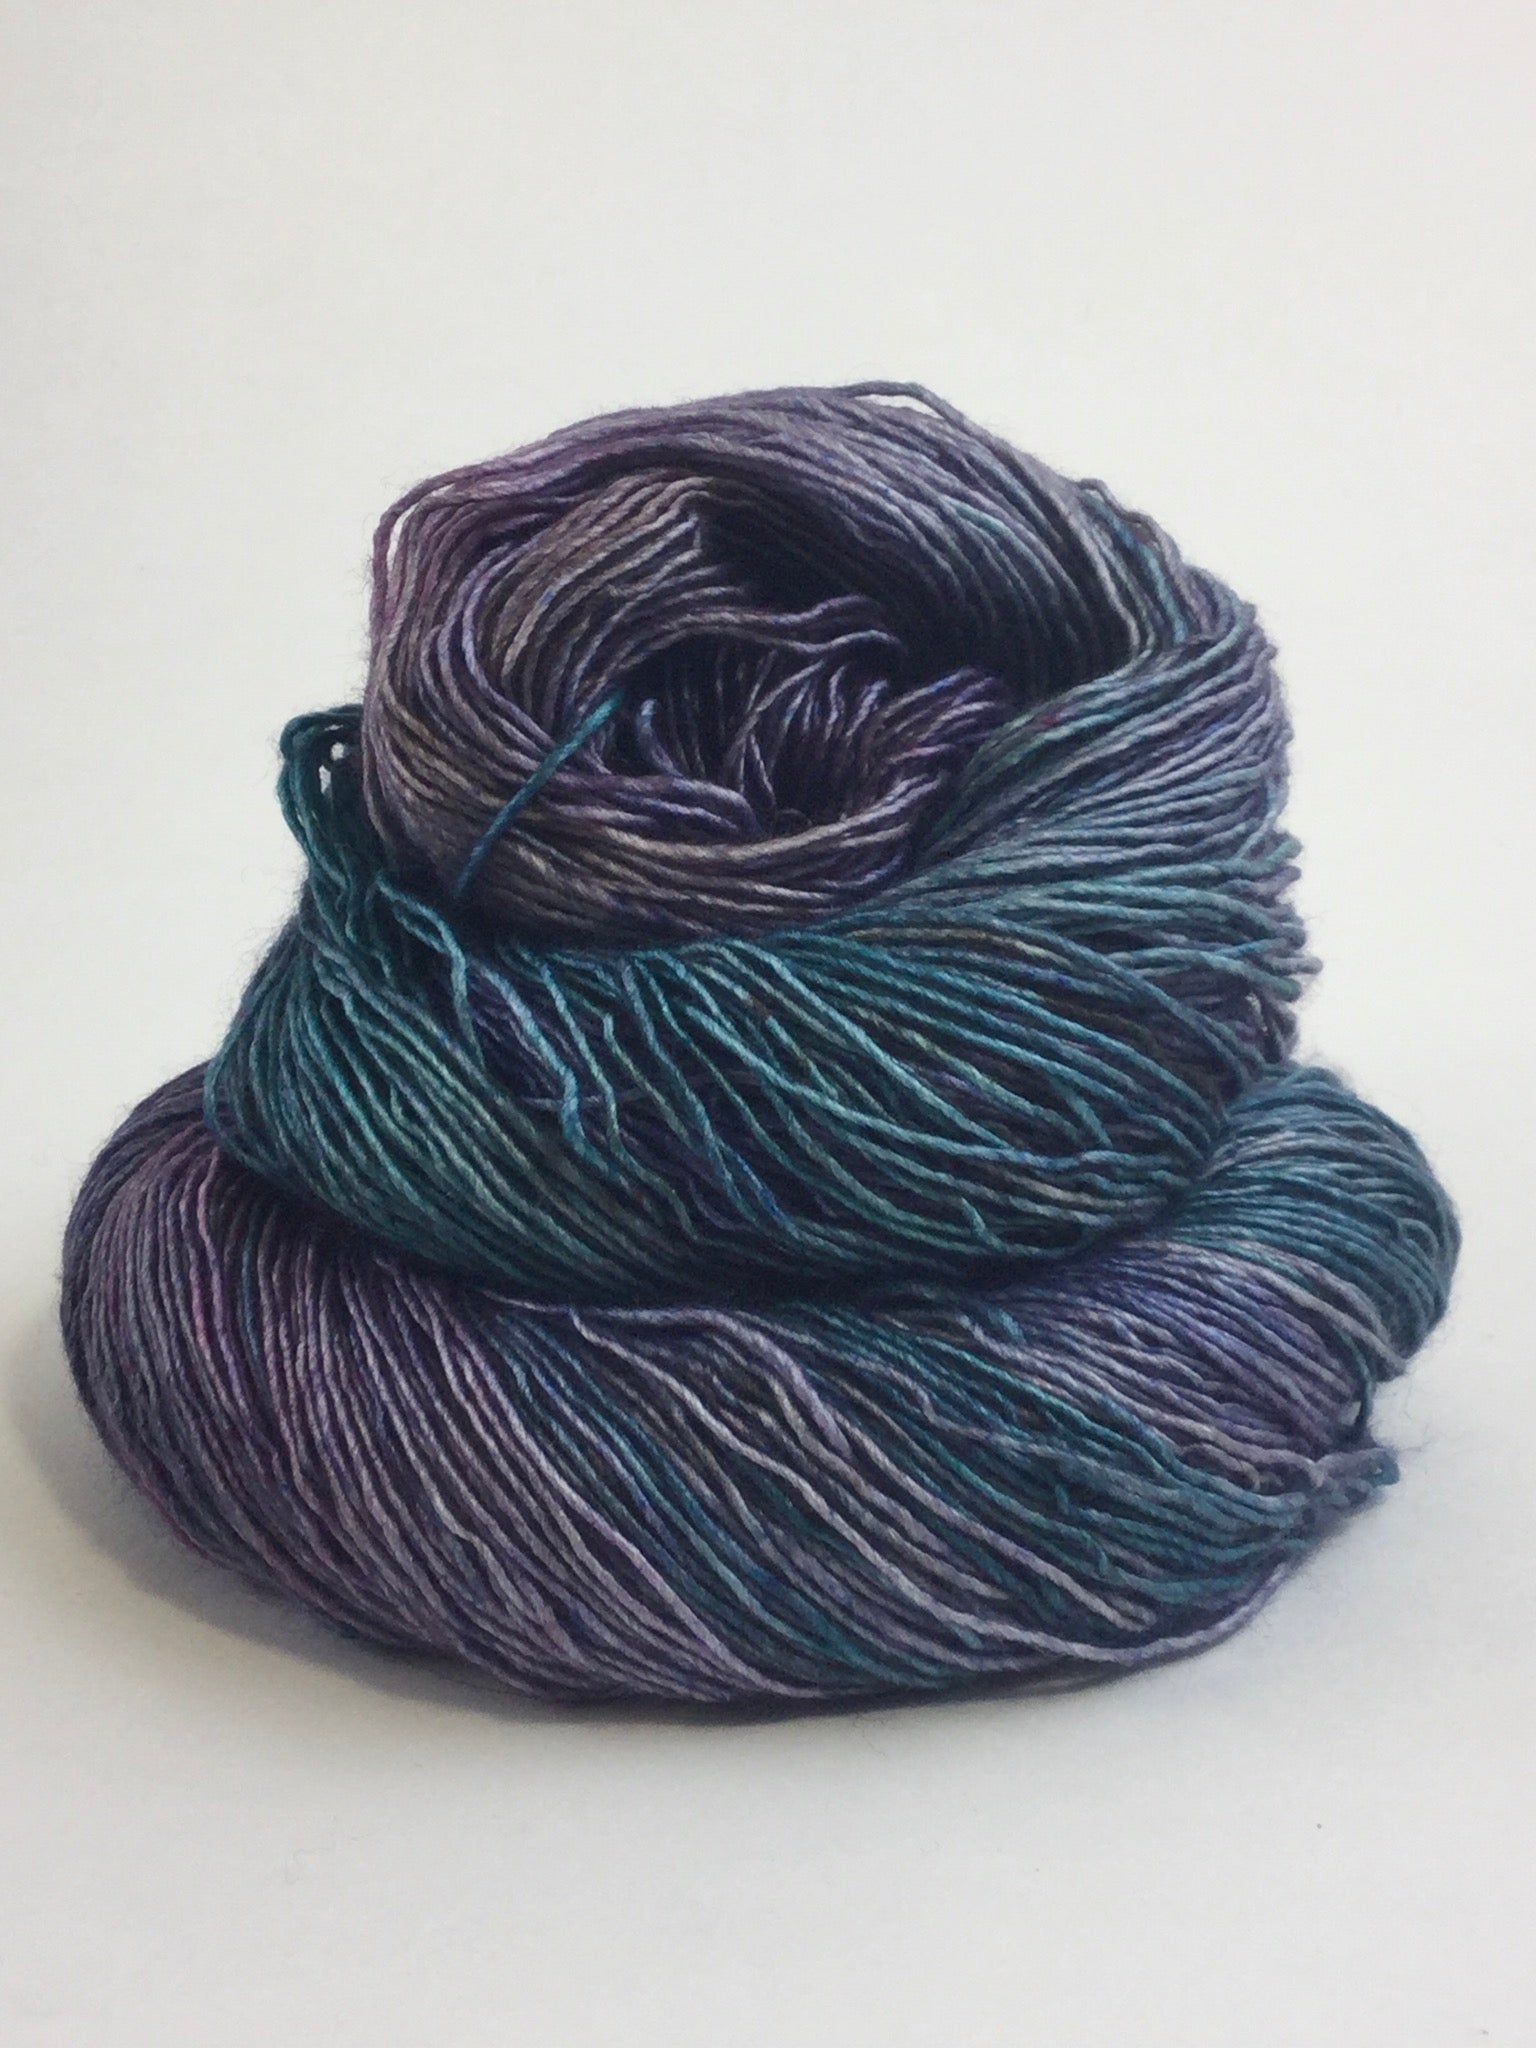 Slough - River Silk and Merino from Tributary Yarns